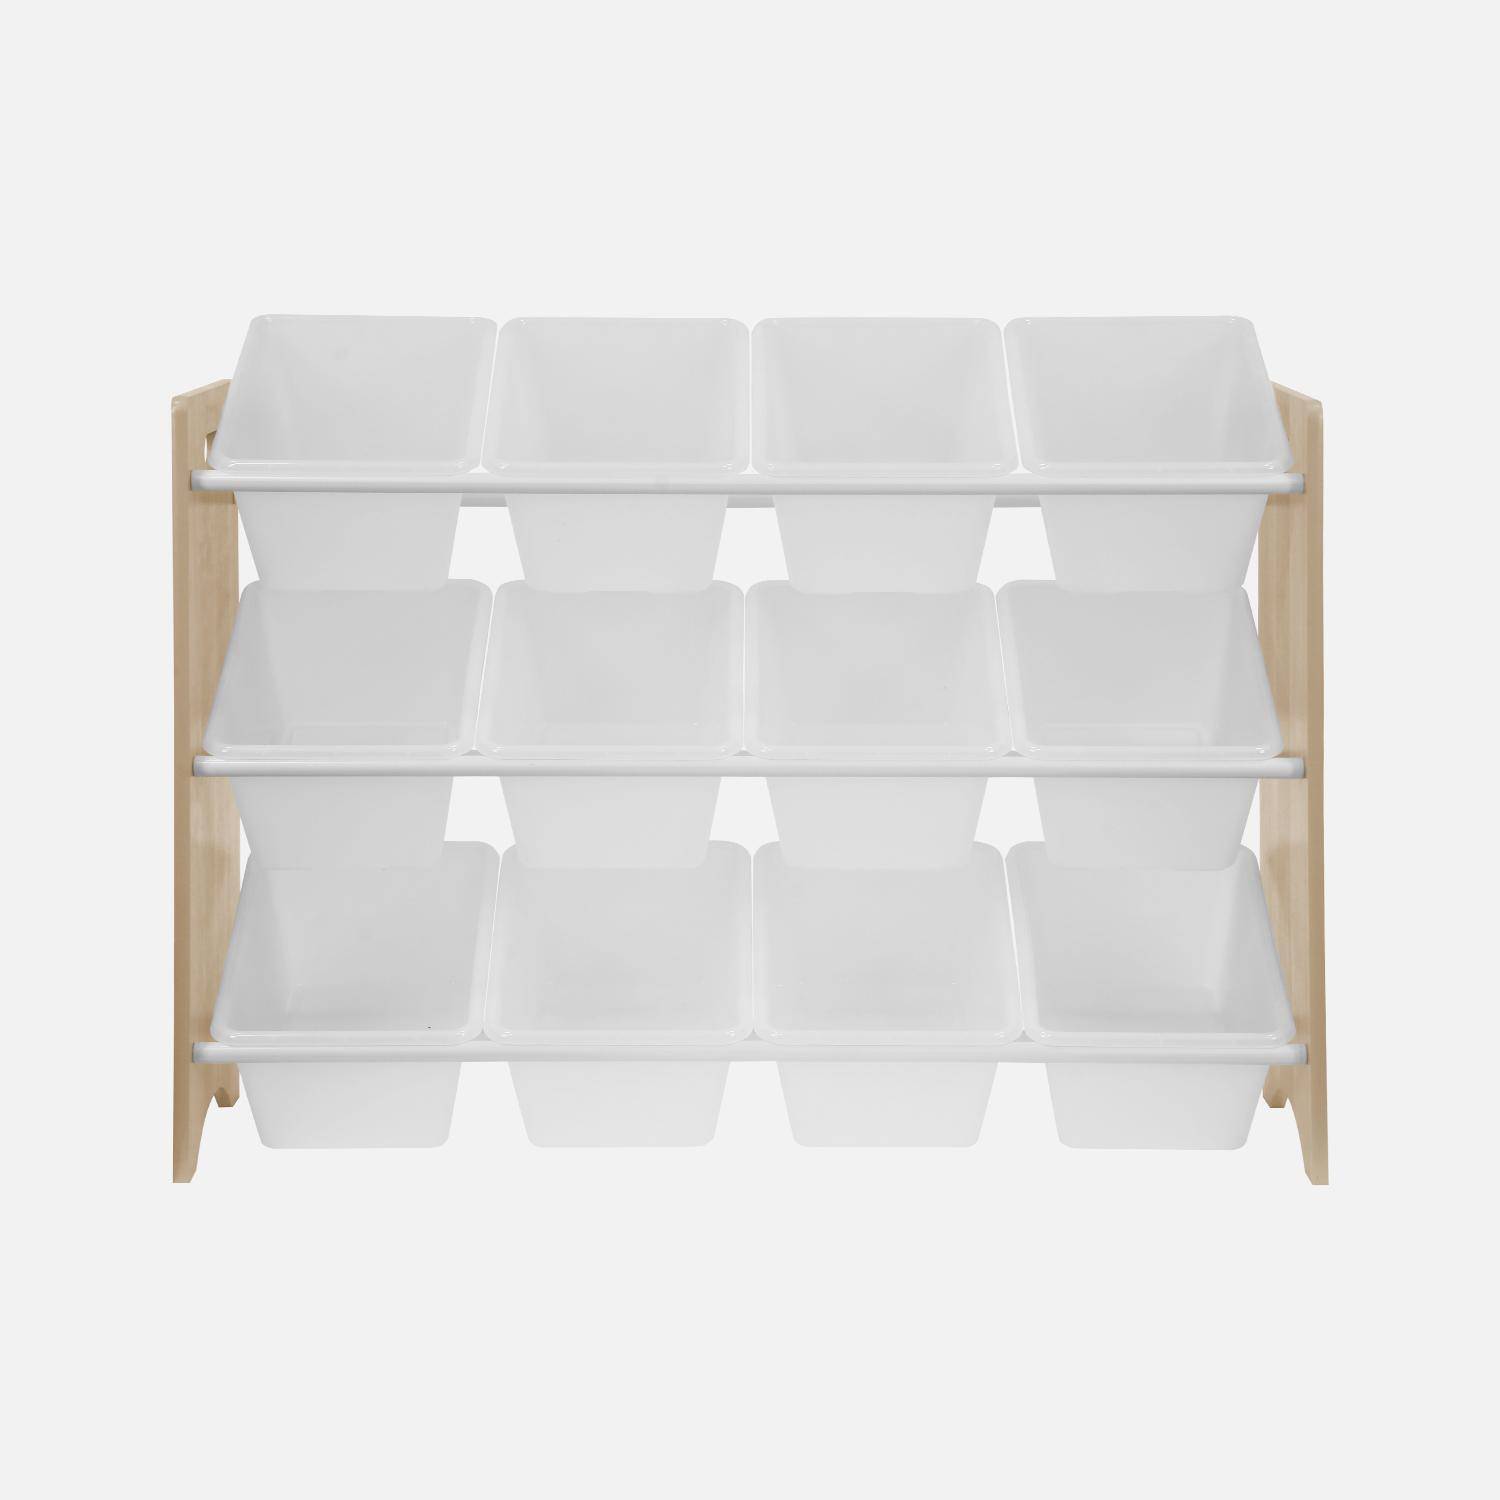 Storage combination with 12 boxes for kids toy, 84x29.5x60cm - Tobias - Natural wood colour,sweeek,Photo4